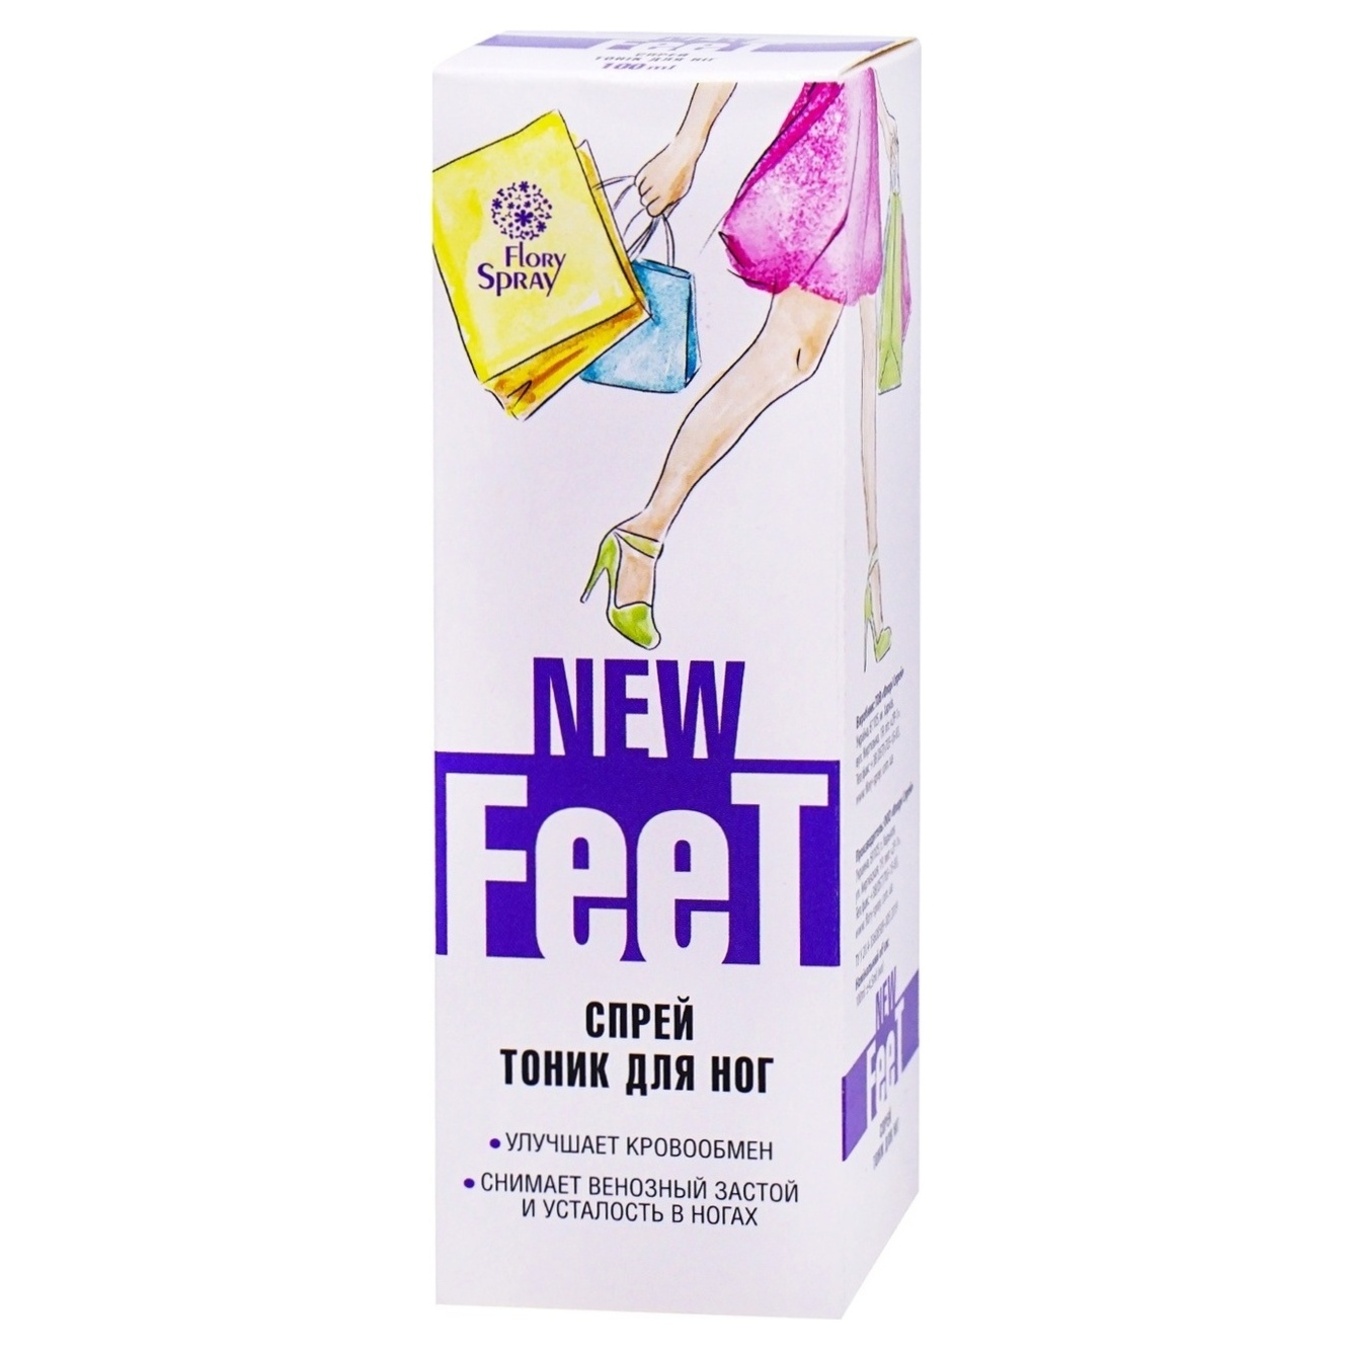 Tonic spray New Feet means for improving blood circulation, removing venous congestion and leg fatigue 100ml